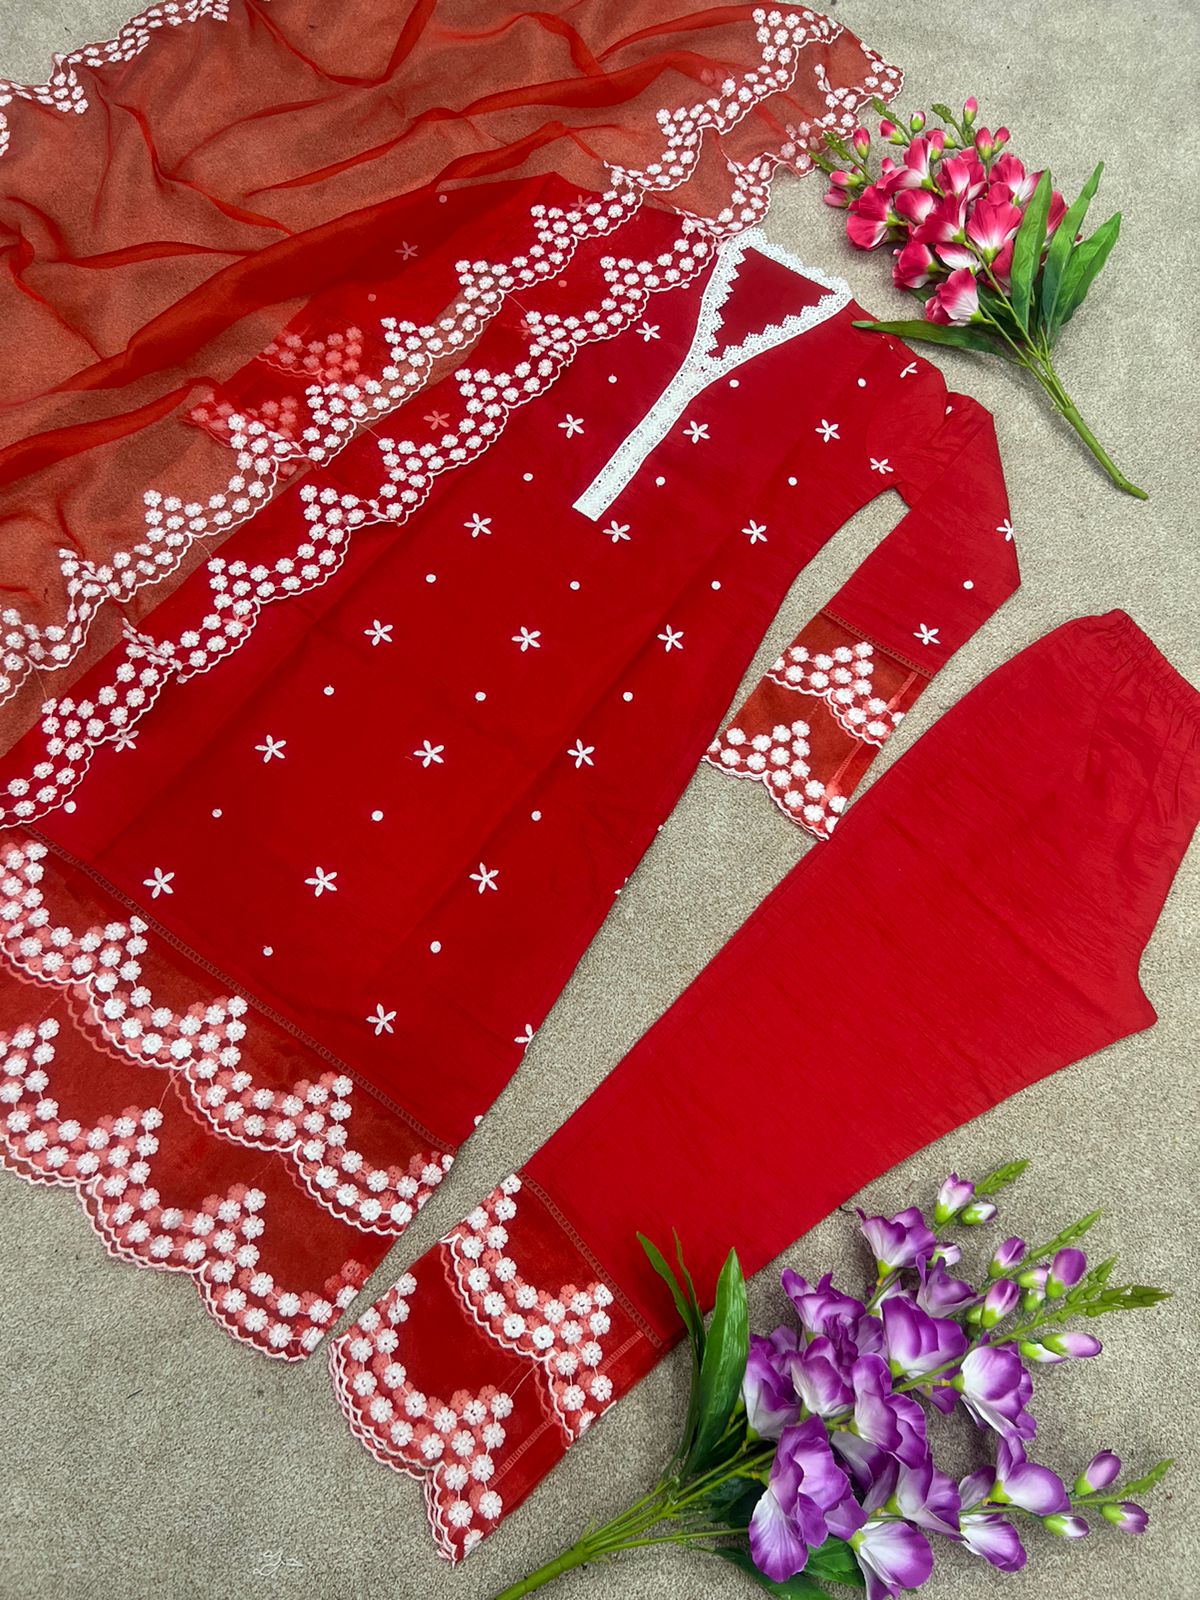 Buy Red  color lucknowi style kurta set for stylish look